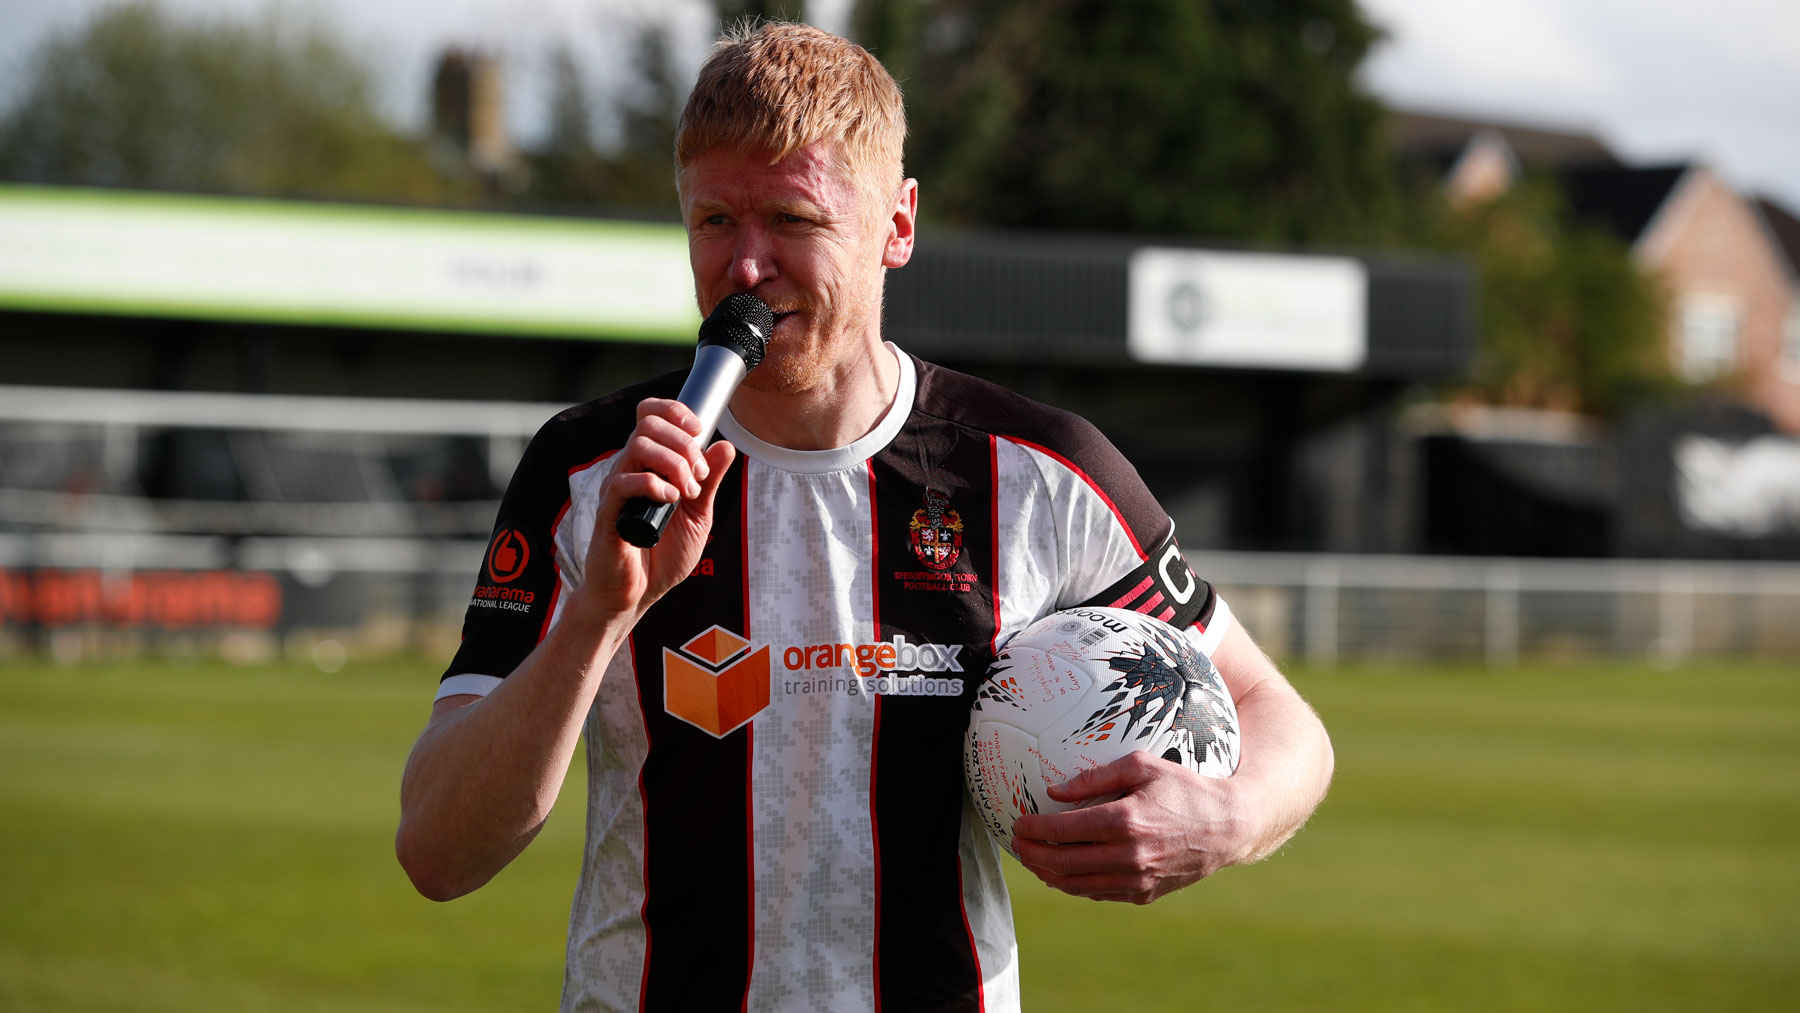 Spennymoor Town captain James Curtis